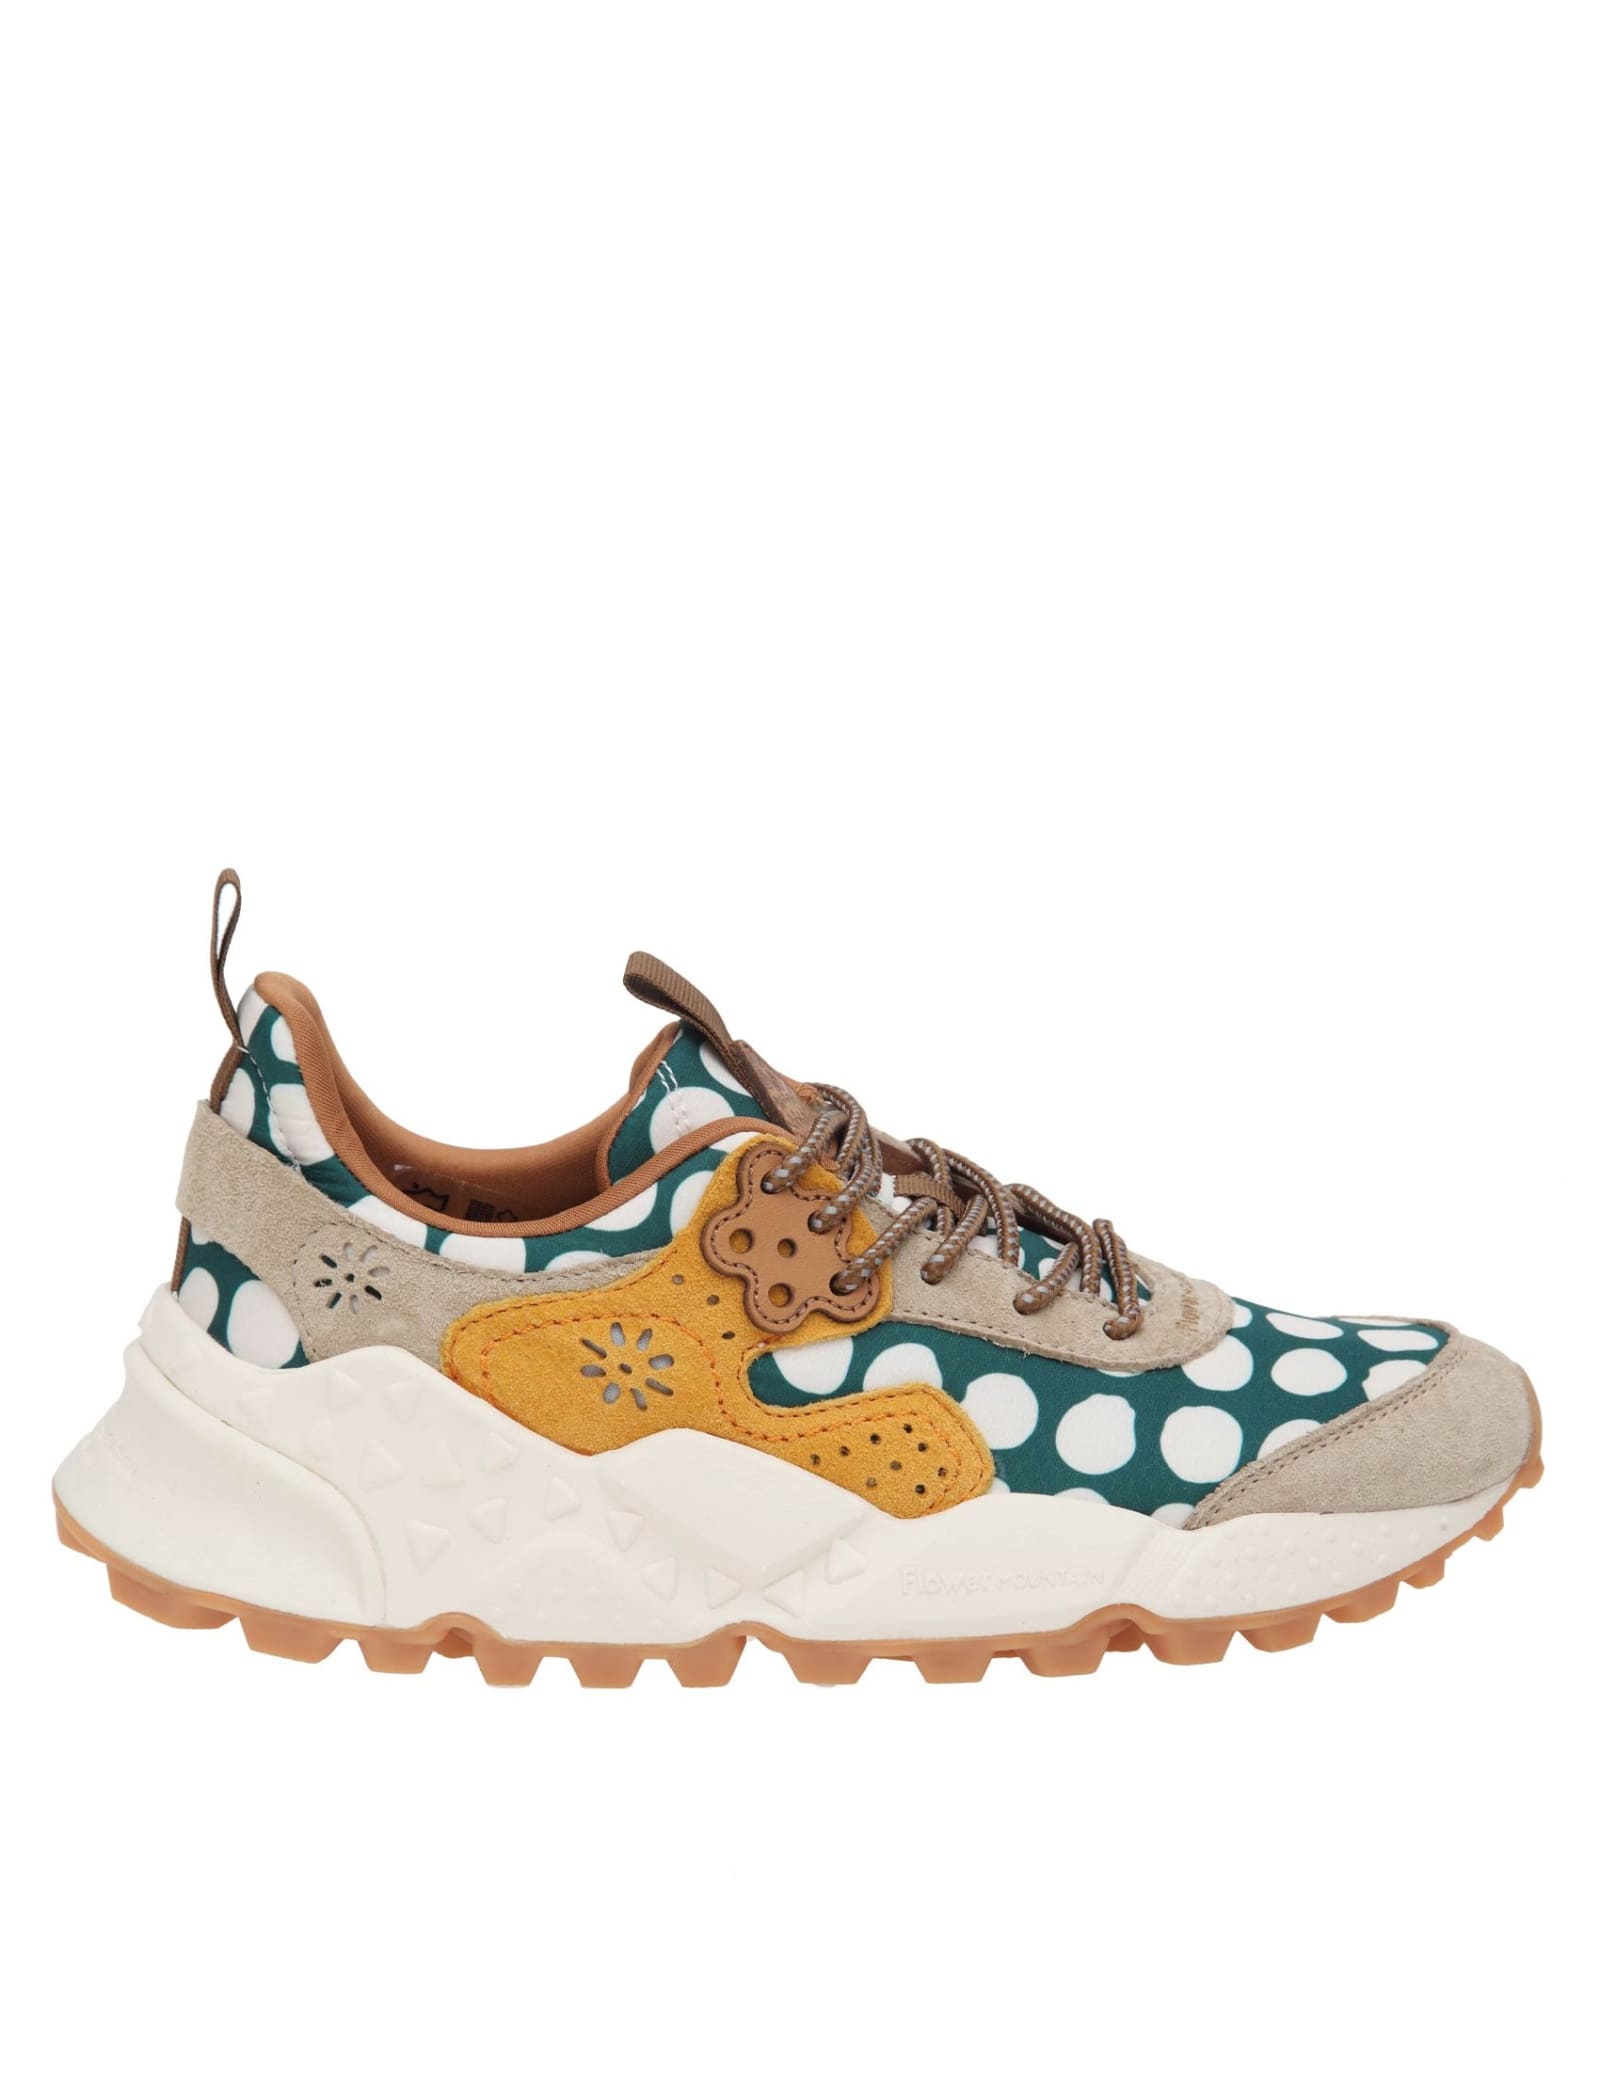 Flower Mountain Kotetsu Sneakers In Fabric And Suede